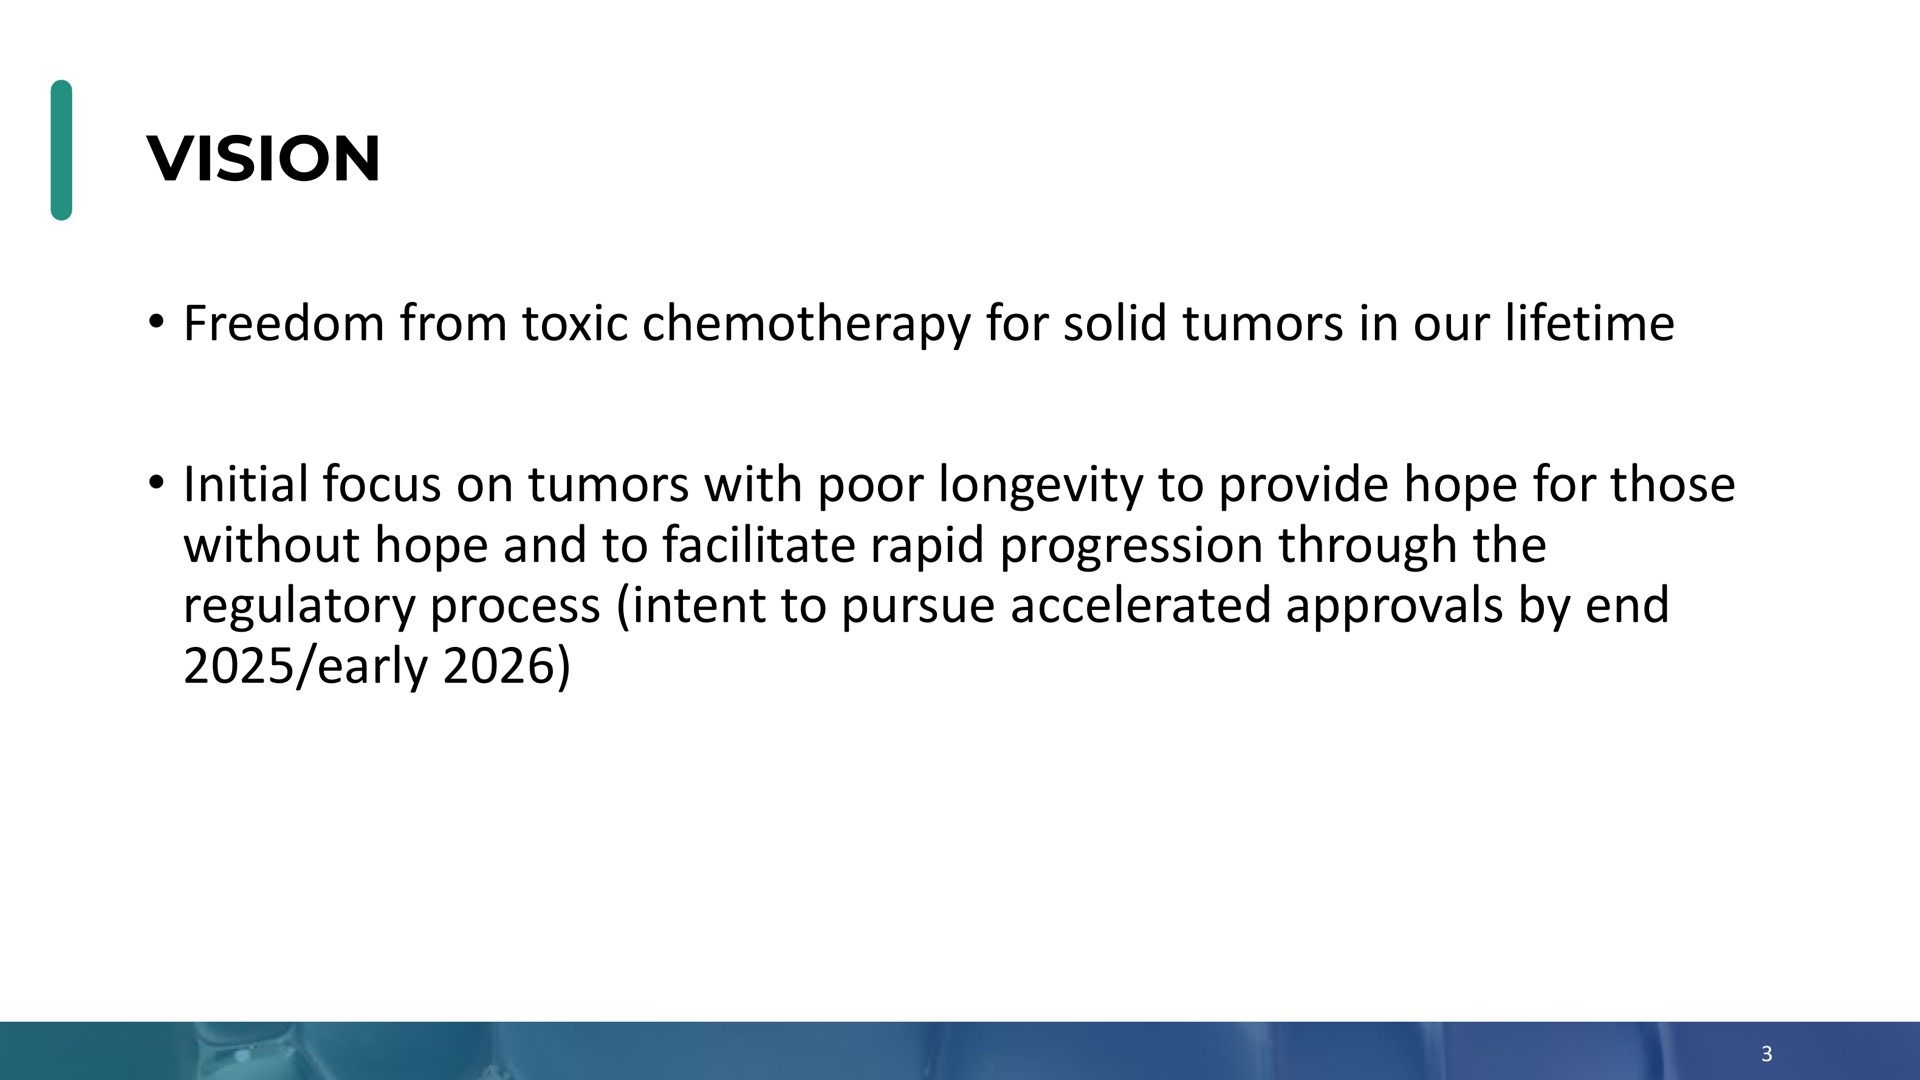 vision freedom from toxic chemotherapy for solid tumors in our lifetime initial focus on tumors with poor longevity to provide hope for those without hope and to facilitate rapid progression through the regulatory process intent to pursue accelerated approvals by end early | Enochian Biosciences